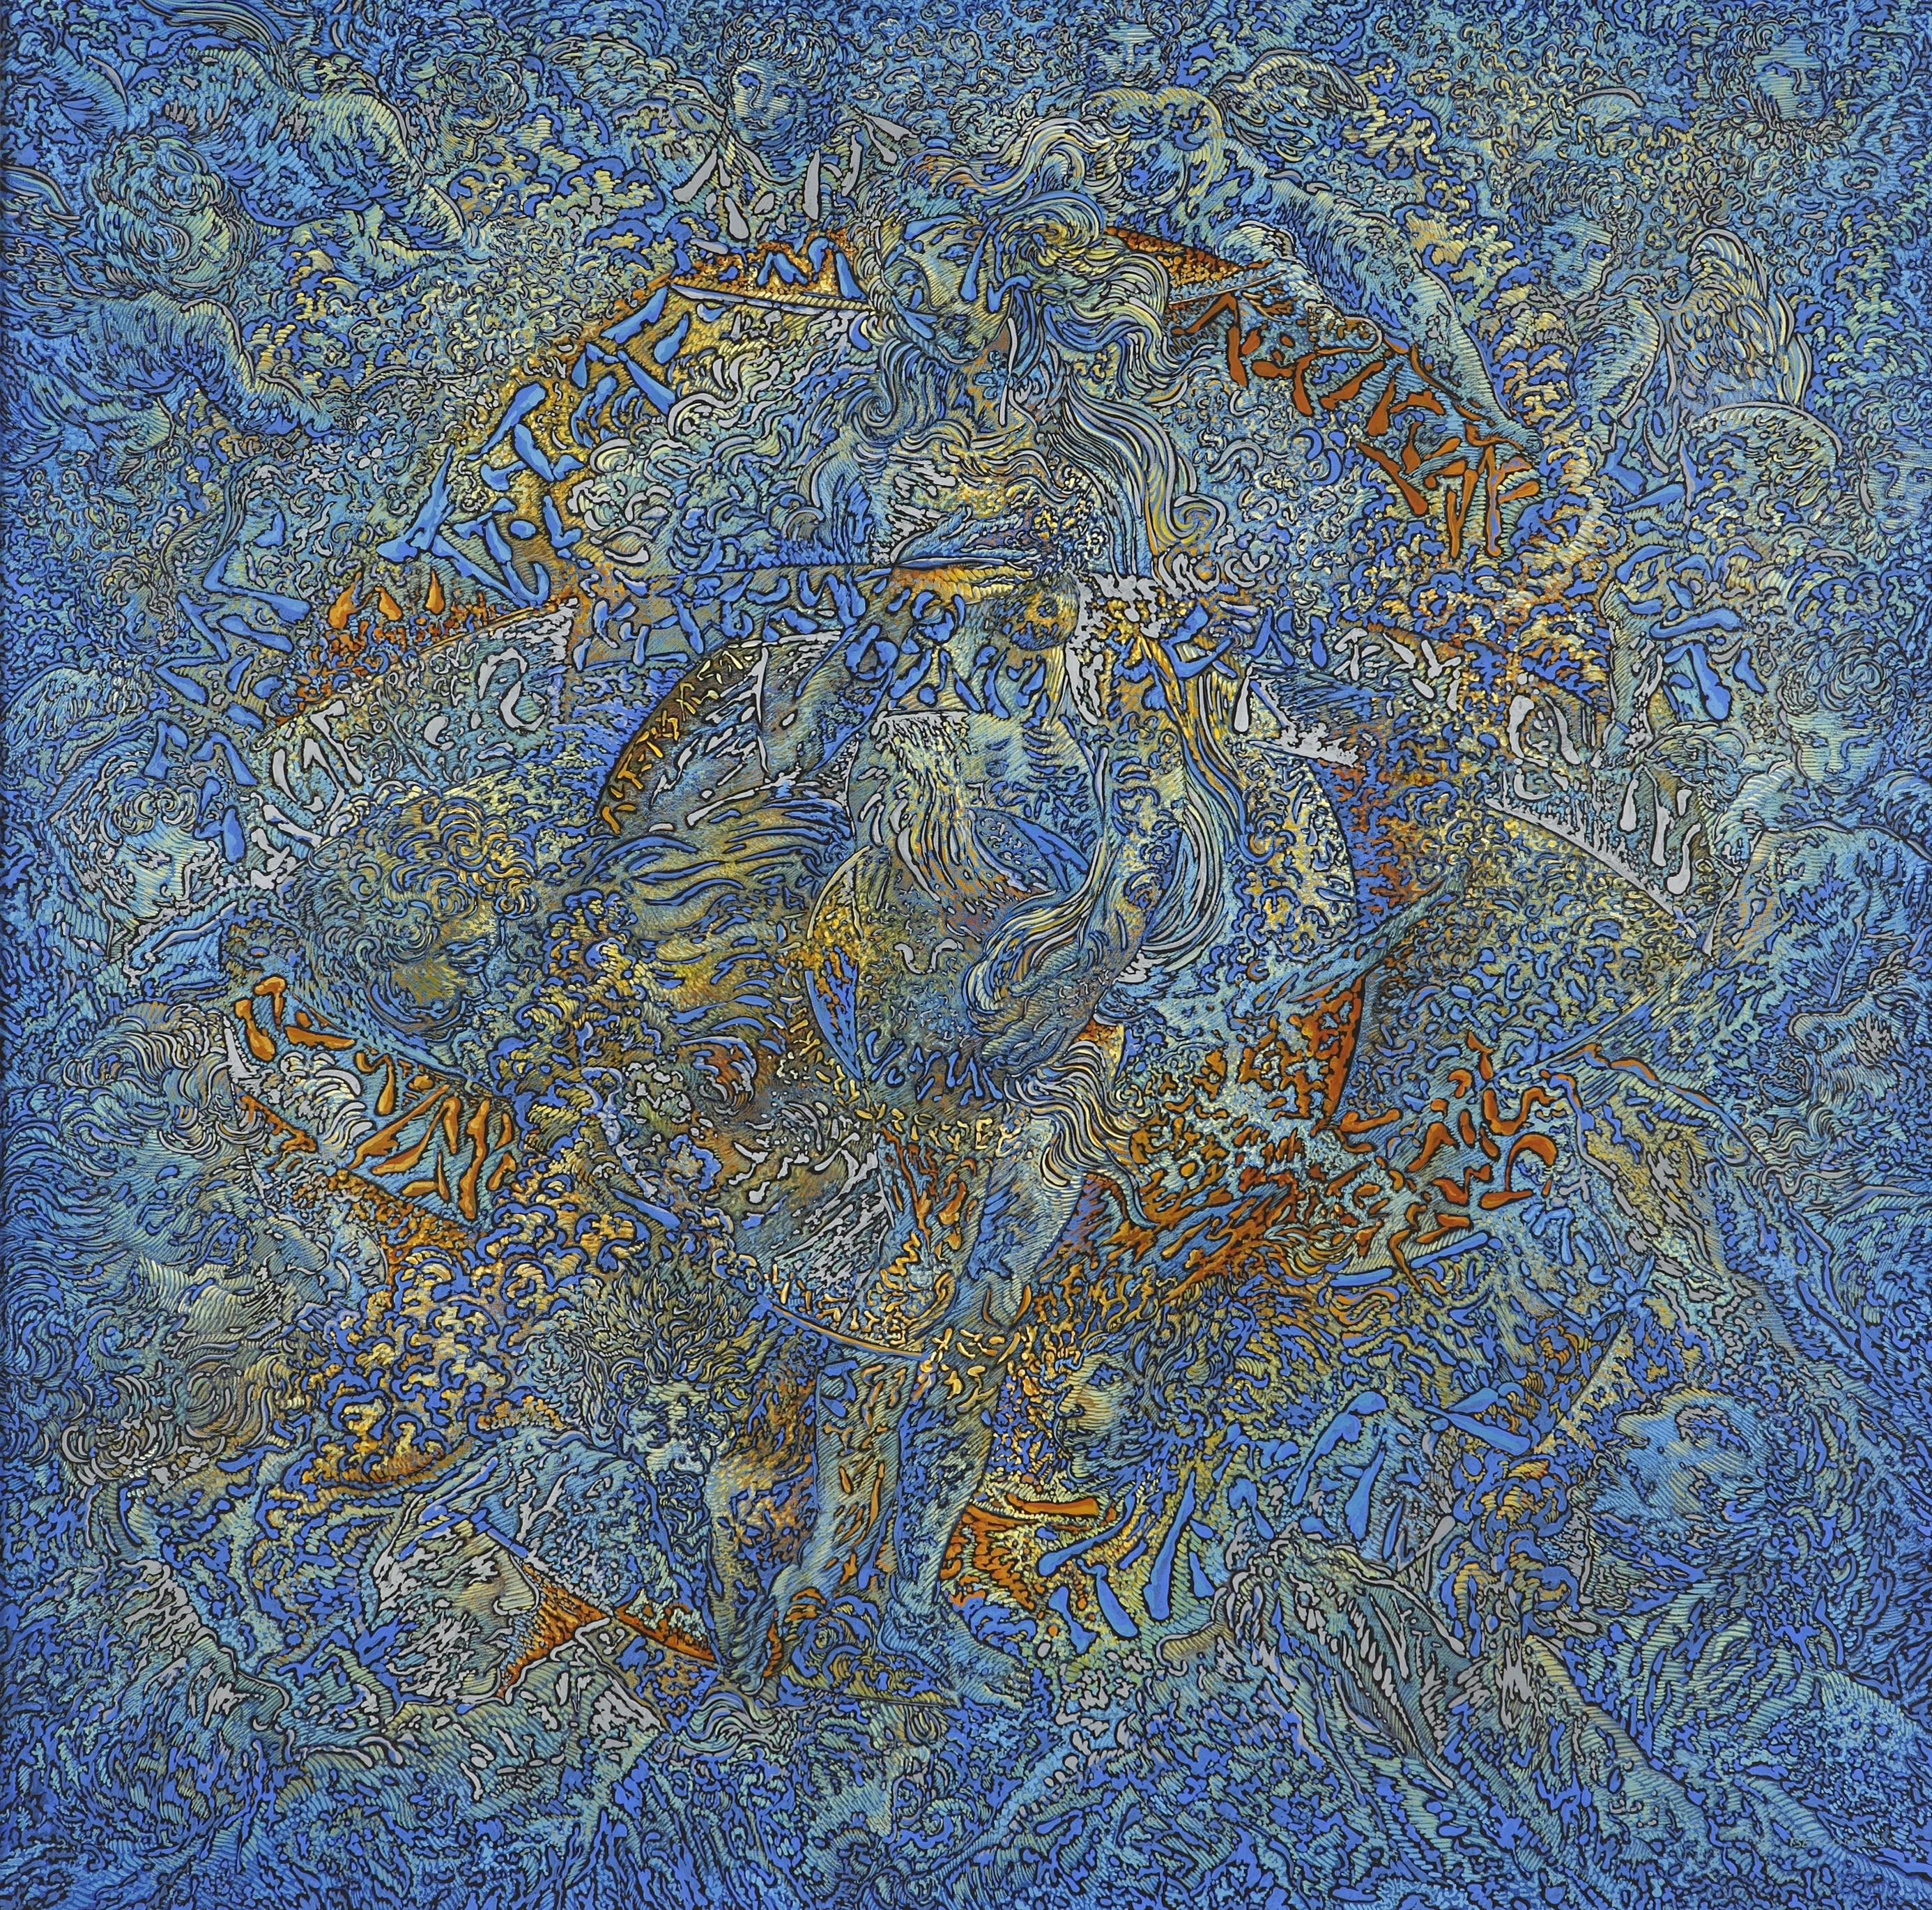 Béatrice Bescond Abstract Painting – "Vénus", Blue and Gold Mythological Goddess with Angels Squared Acrylic Painting